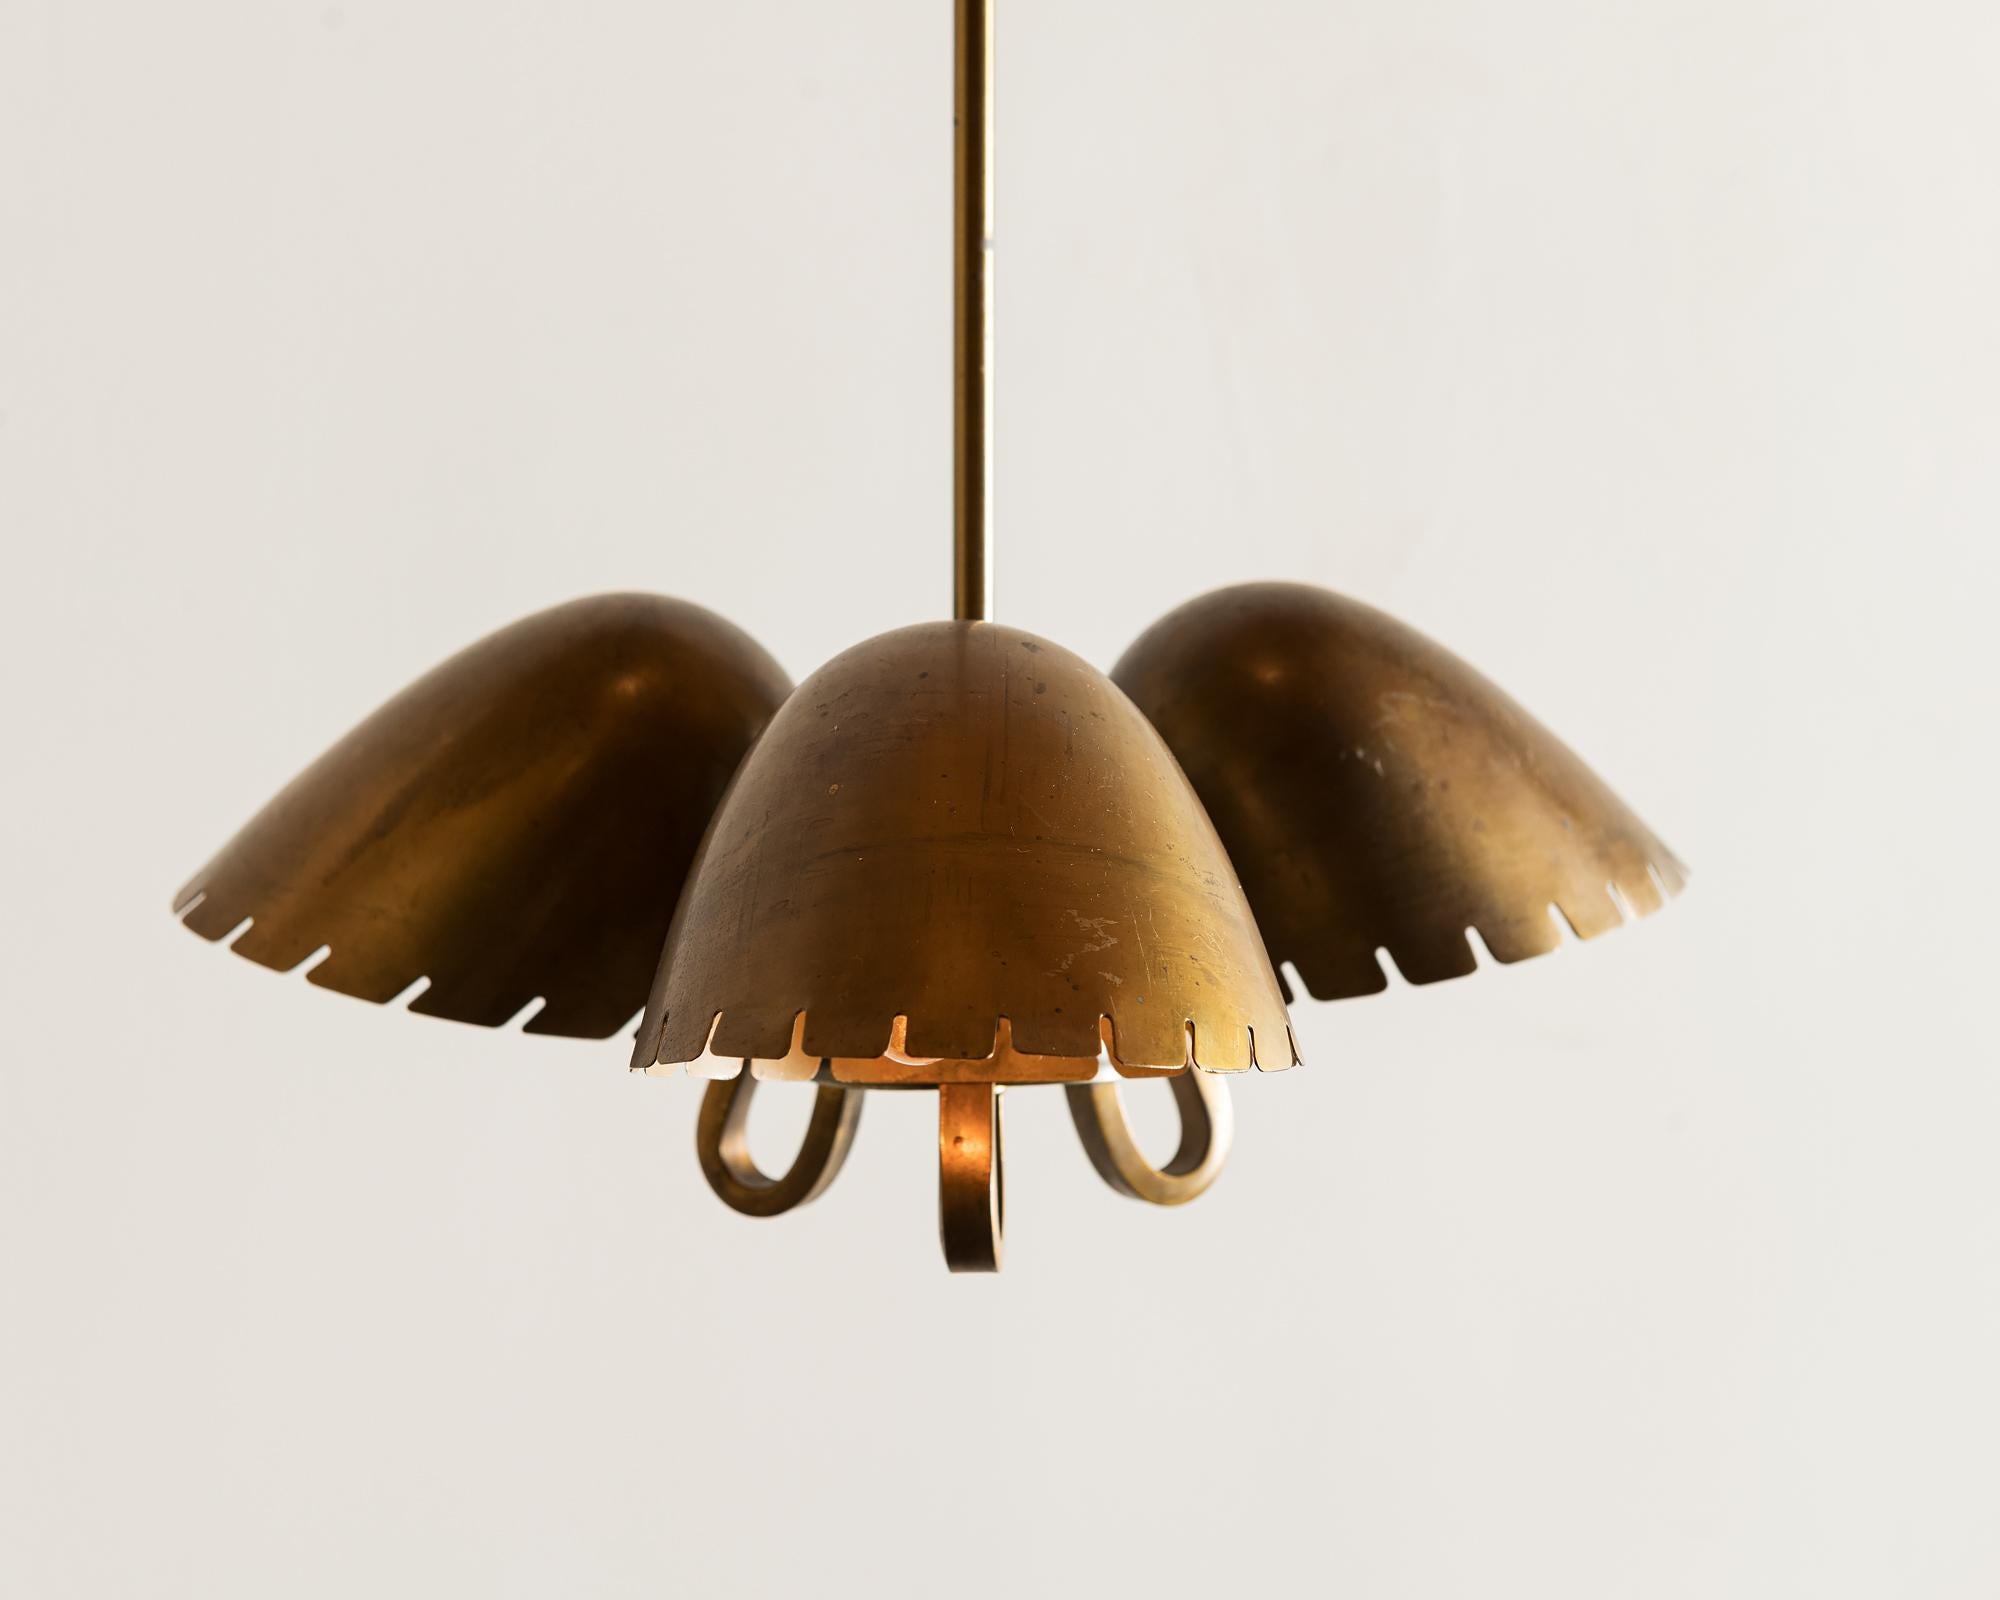 A rare brass pendant by Carl-Axel Acking, 1940s.

Listed dimensions are for the fixture without the drop. The drop is a fixed brass rod that runs 50